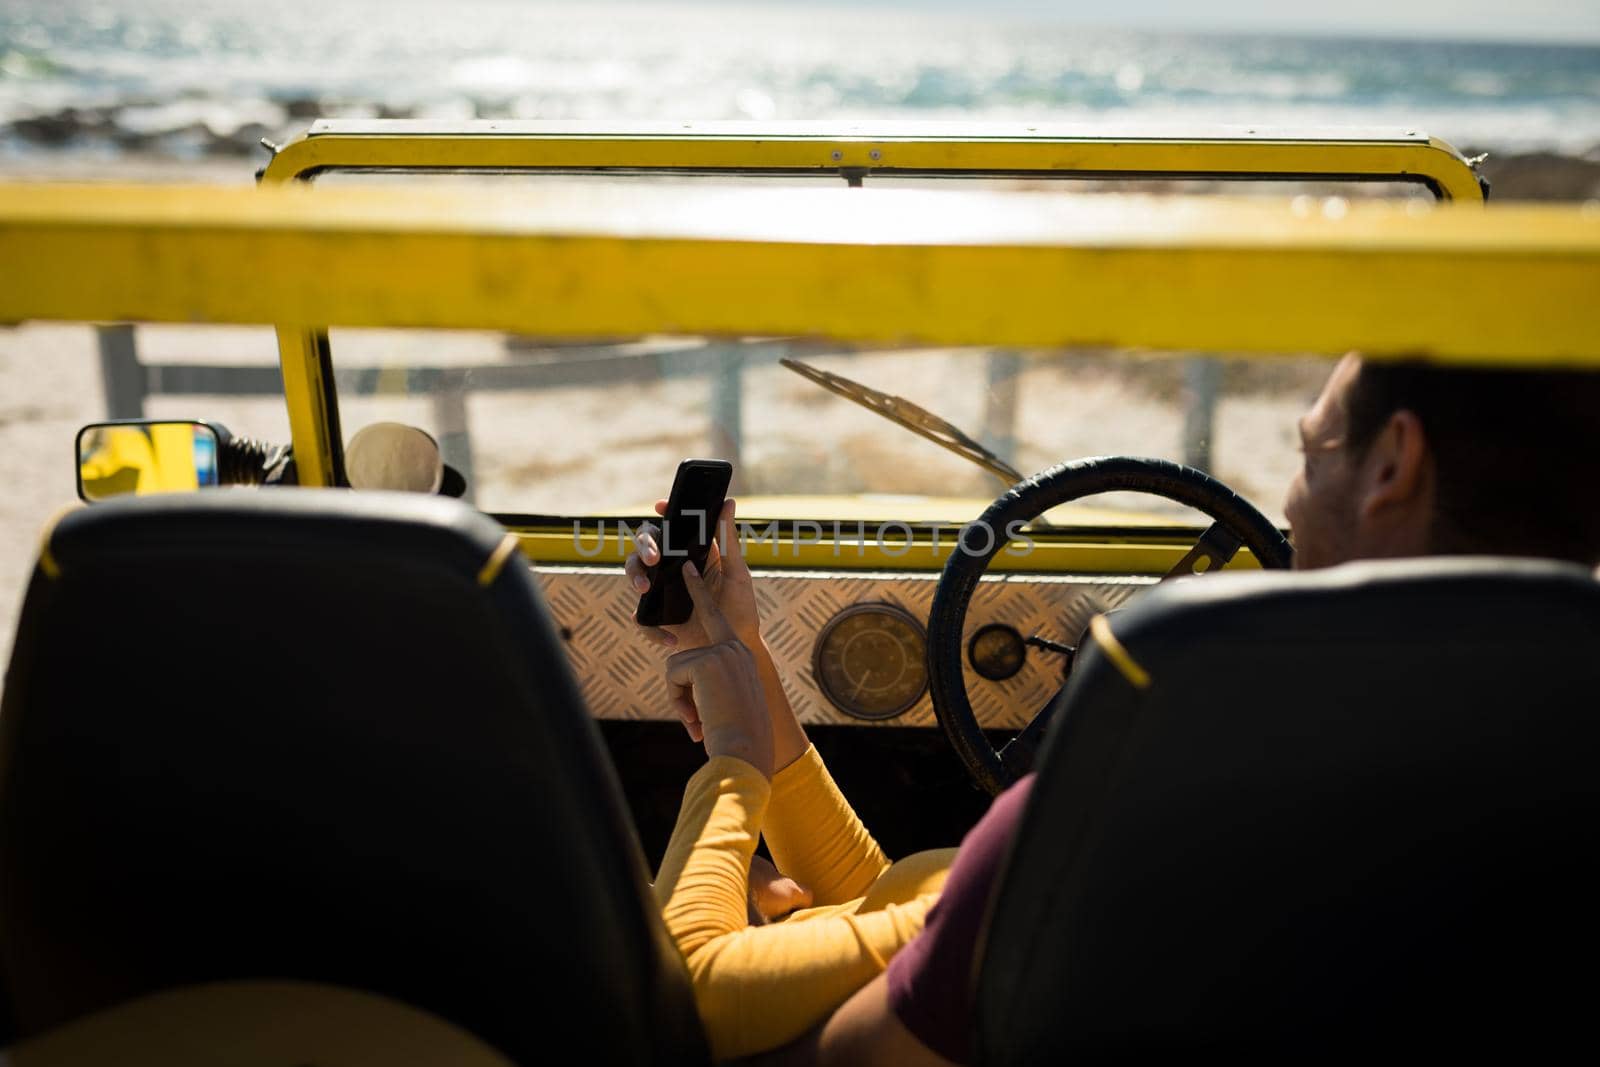 Caucasian couple lying on a beach buggy by the sea using smartphone by Wavebreakmedia